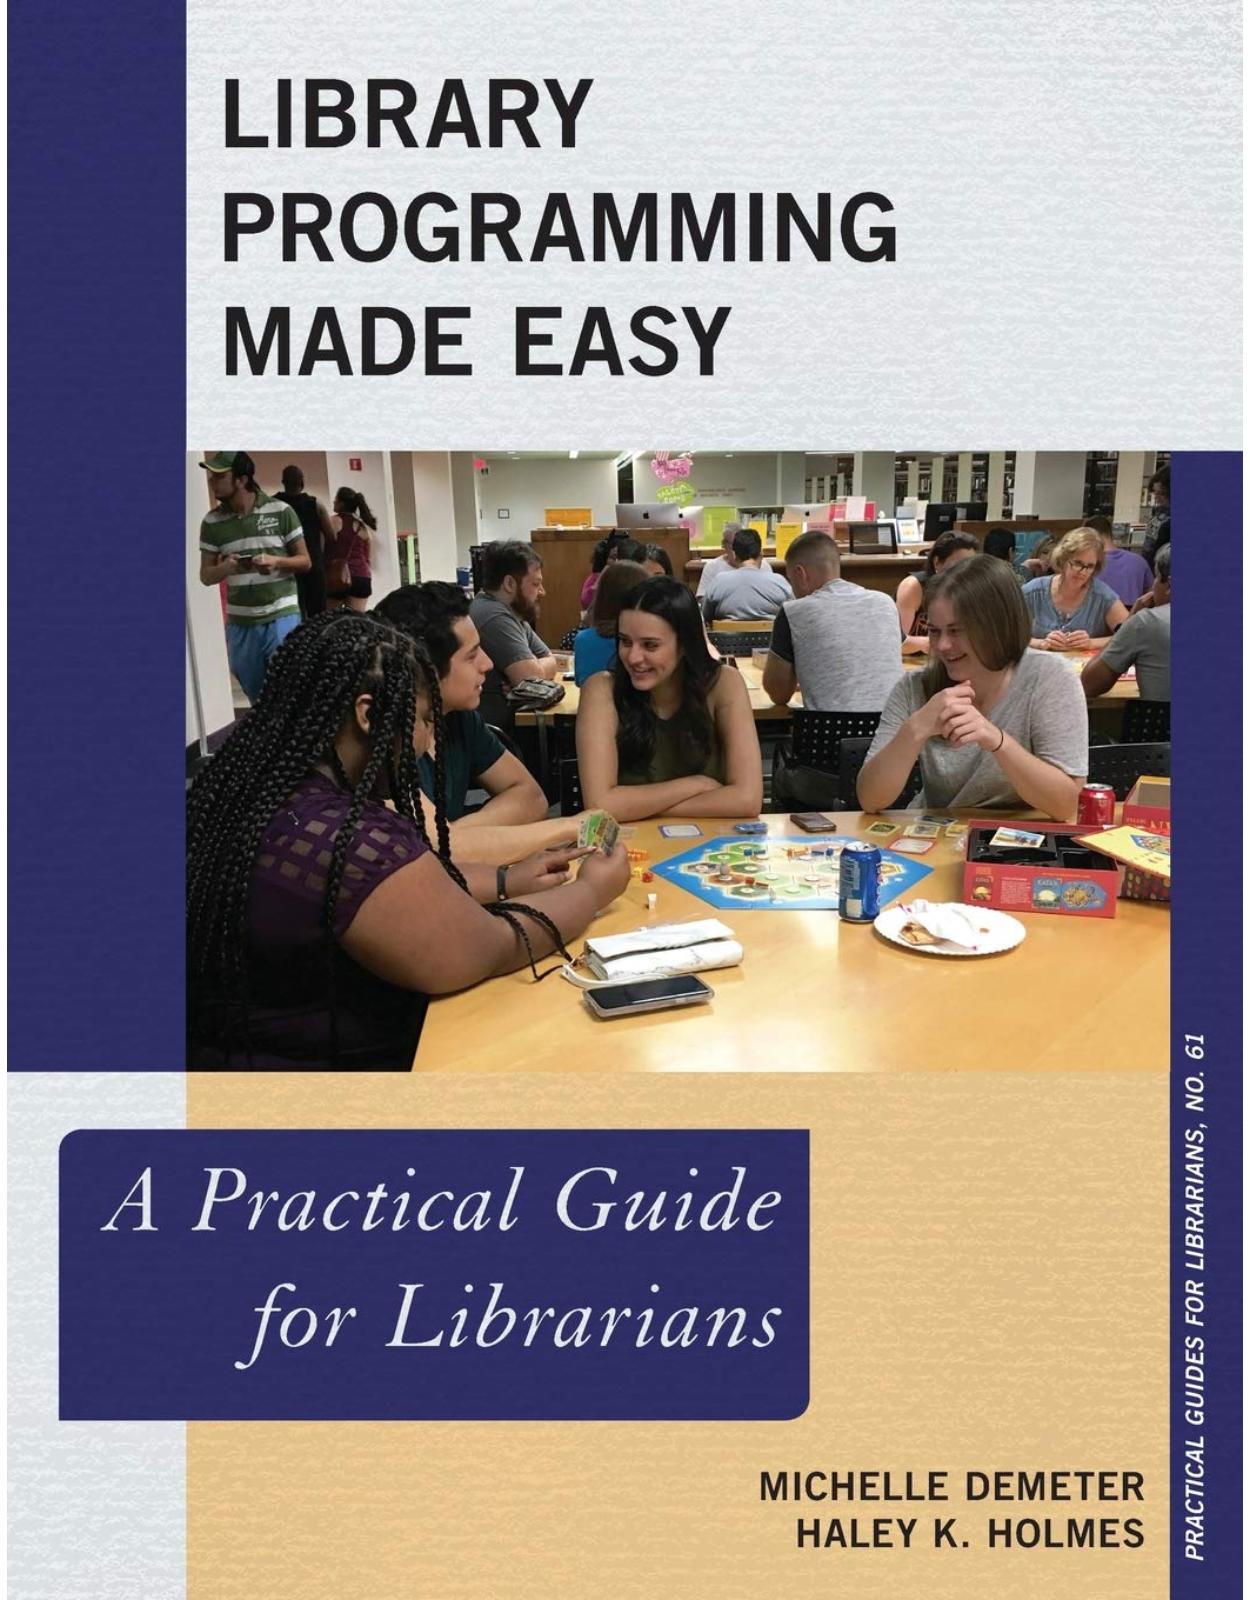 Library Programming Made Easy. A Practical Guide for Librarians